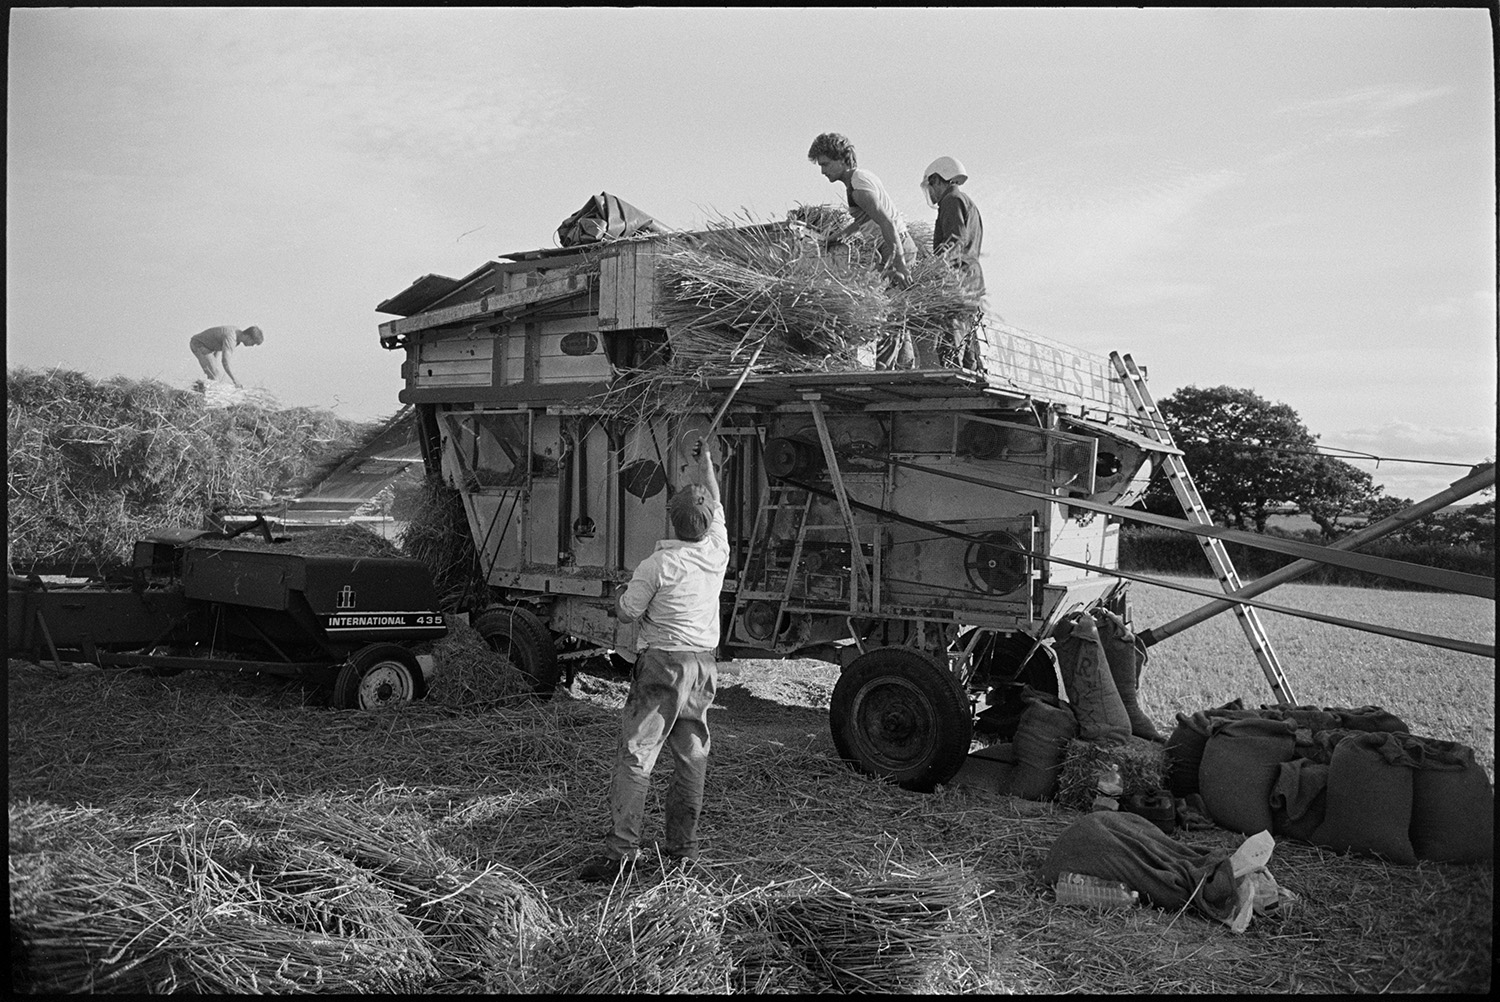 Reedcombers having tea break and working reed comber. 
[Men, including some from the Down family reedcoming in a field at Spittle Farm, Chulmleigh. A man in the foreground is lifting bundles of reed up to two men on the reed comber. One of the men is wearing a mask. Sacks of grain can be seen by the comber and in the background a man is stood on a trailer loaded with bundle of reed which have been through the reed comber.]